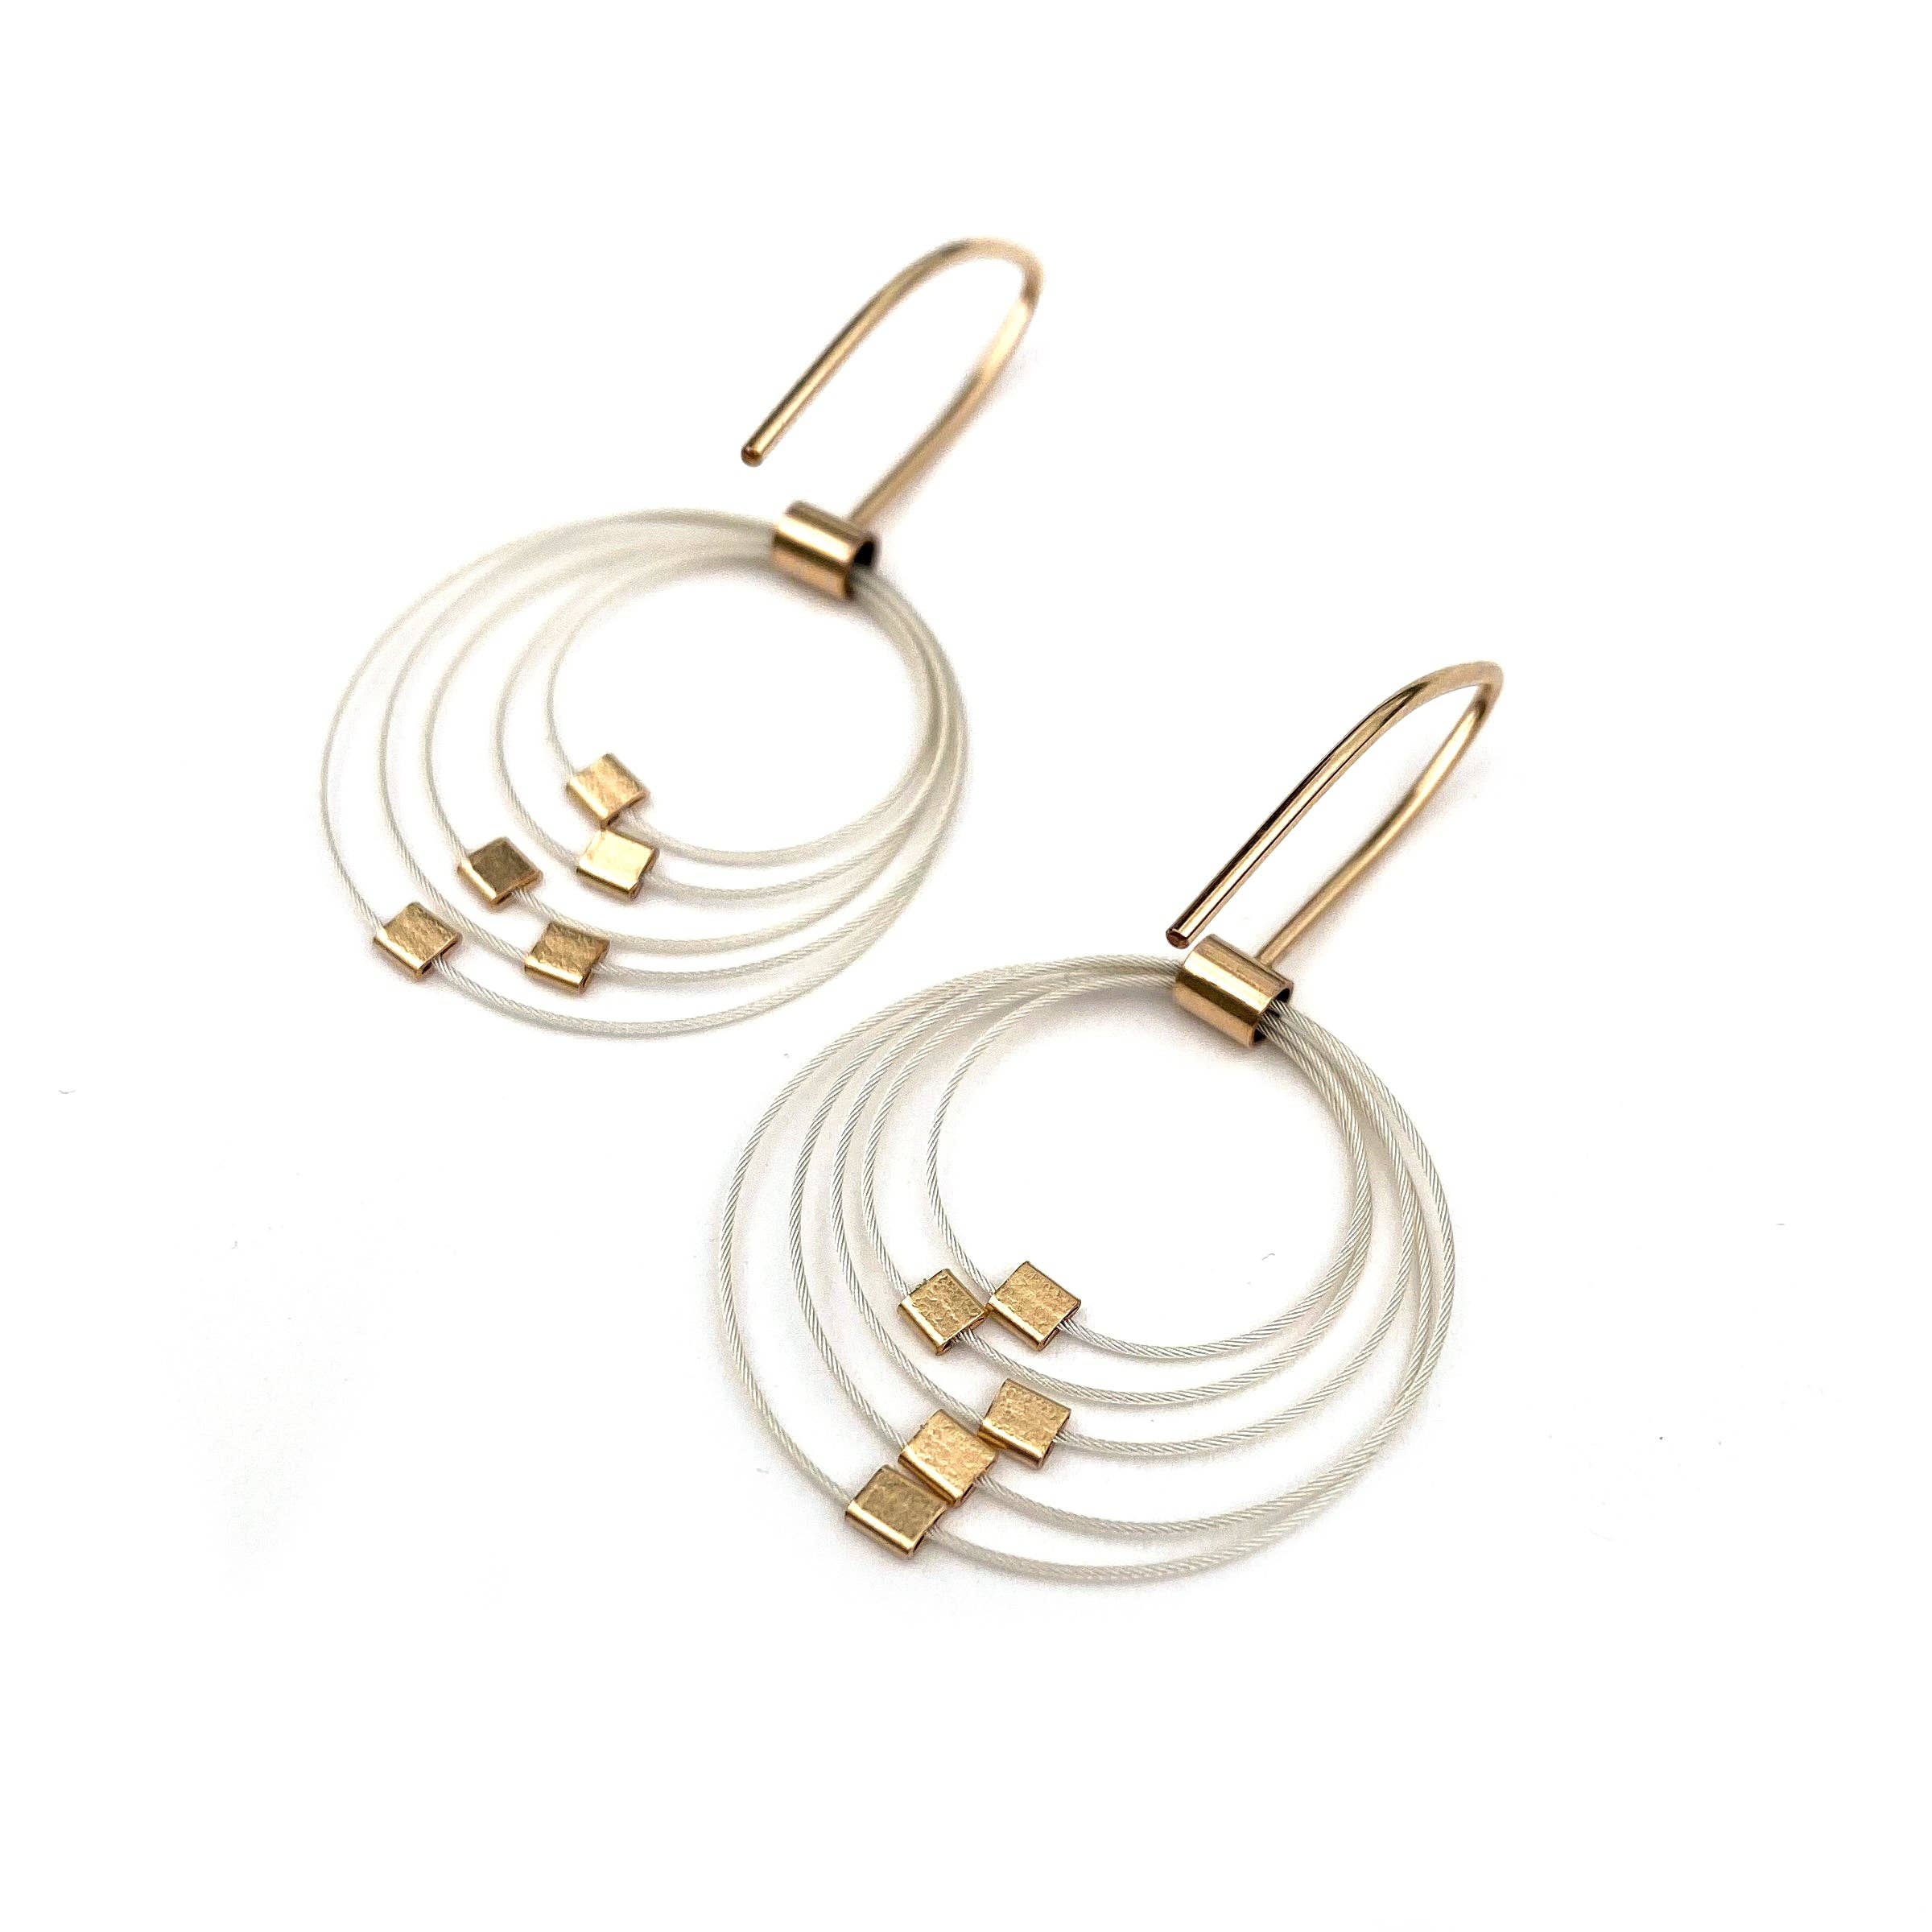 Gold earrings with five hoops that hang down from ear